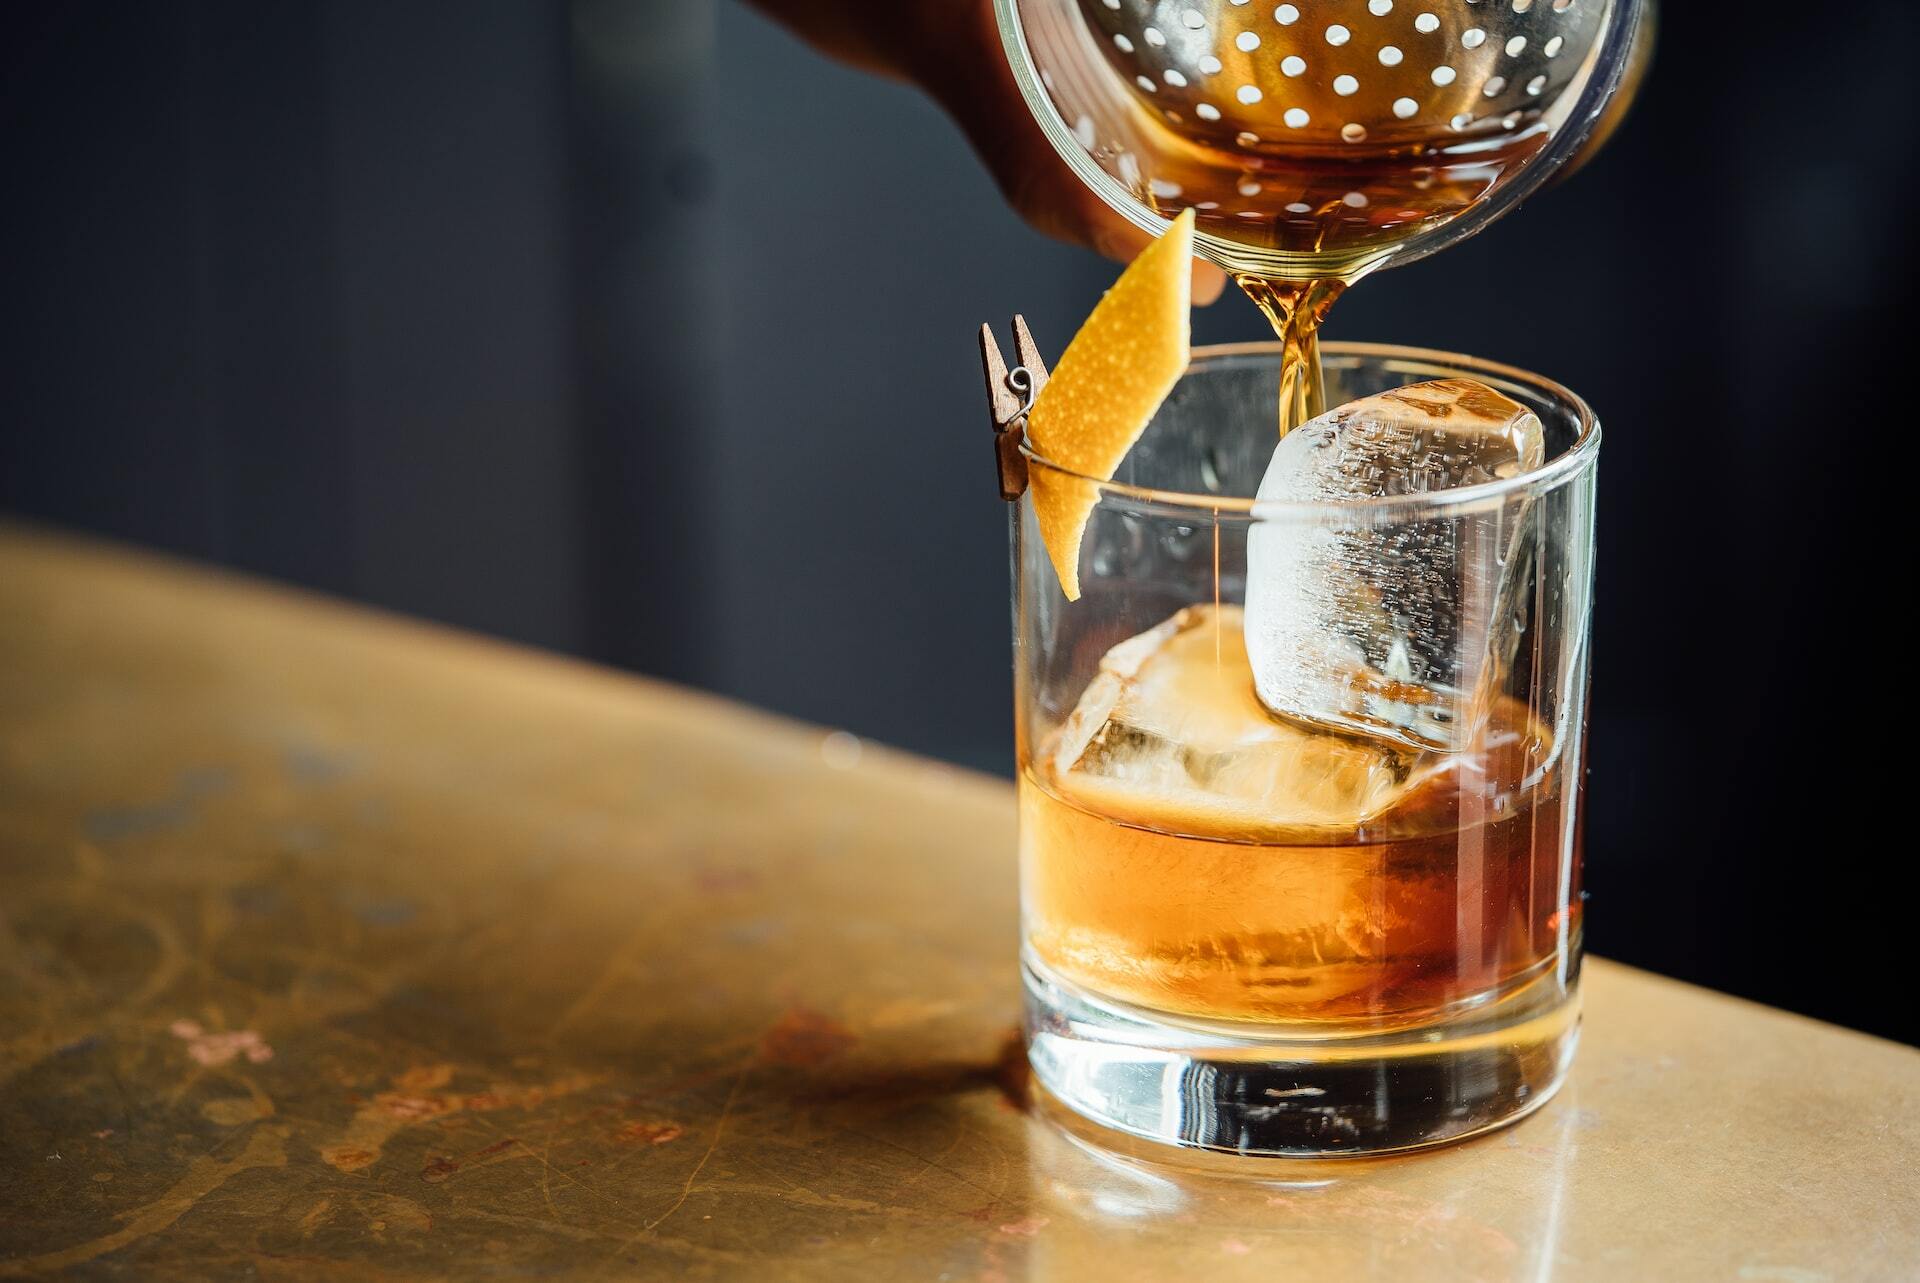 Sip on Craft Spirits at the Whiskey Festival on November 5th